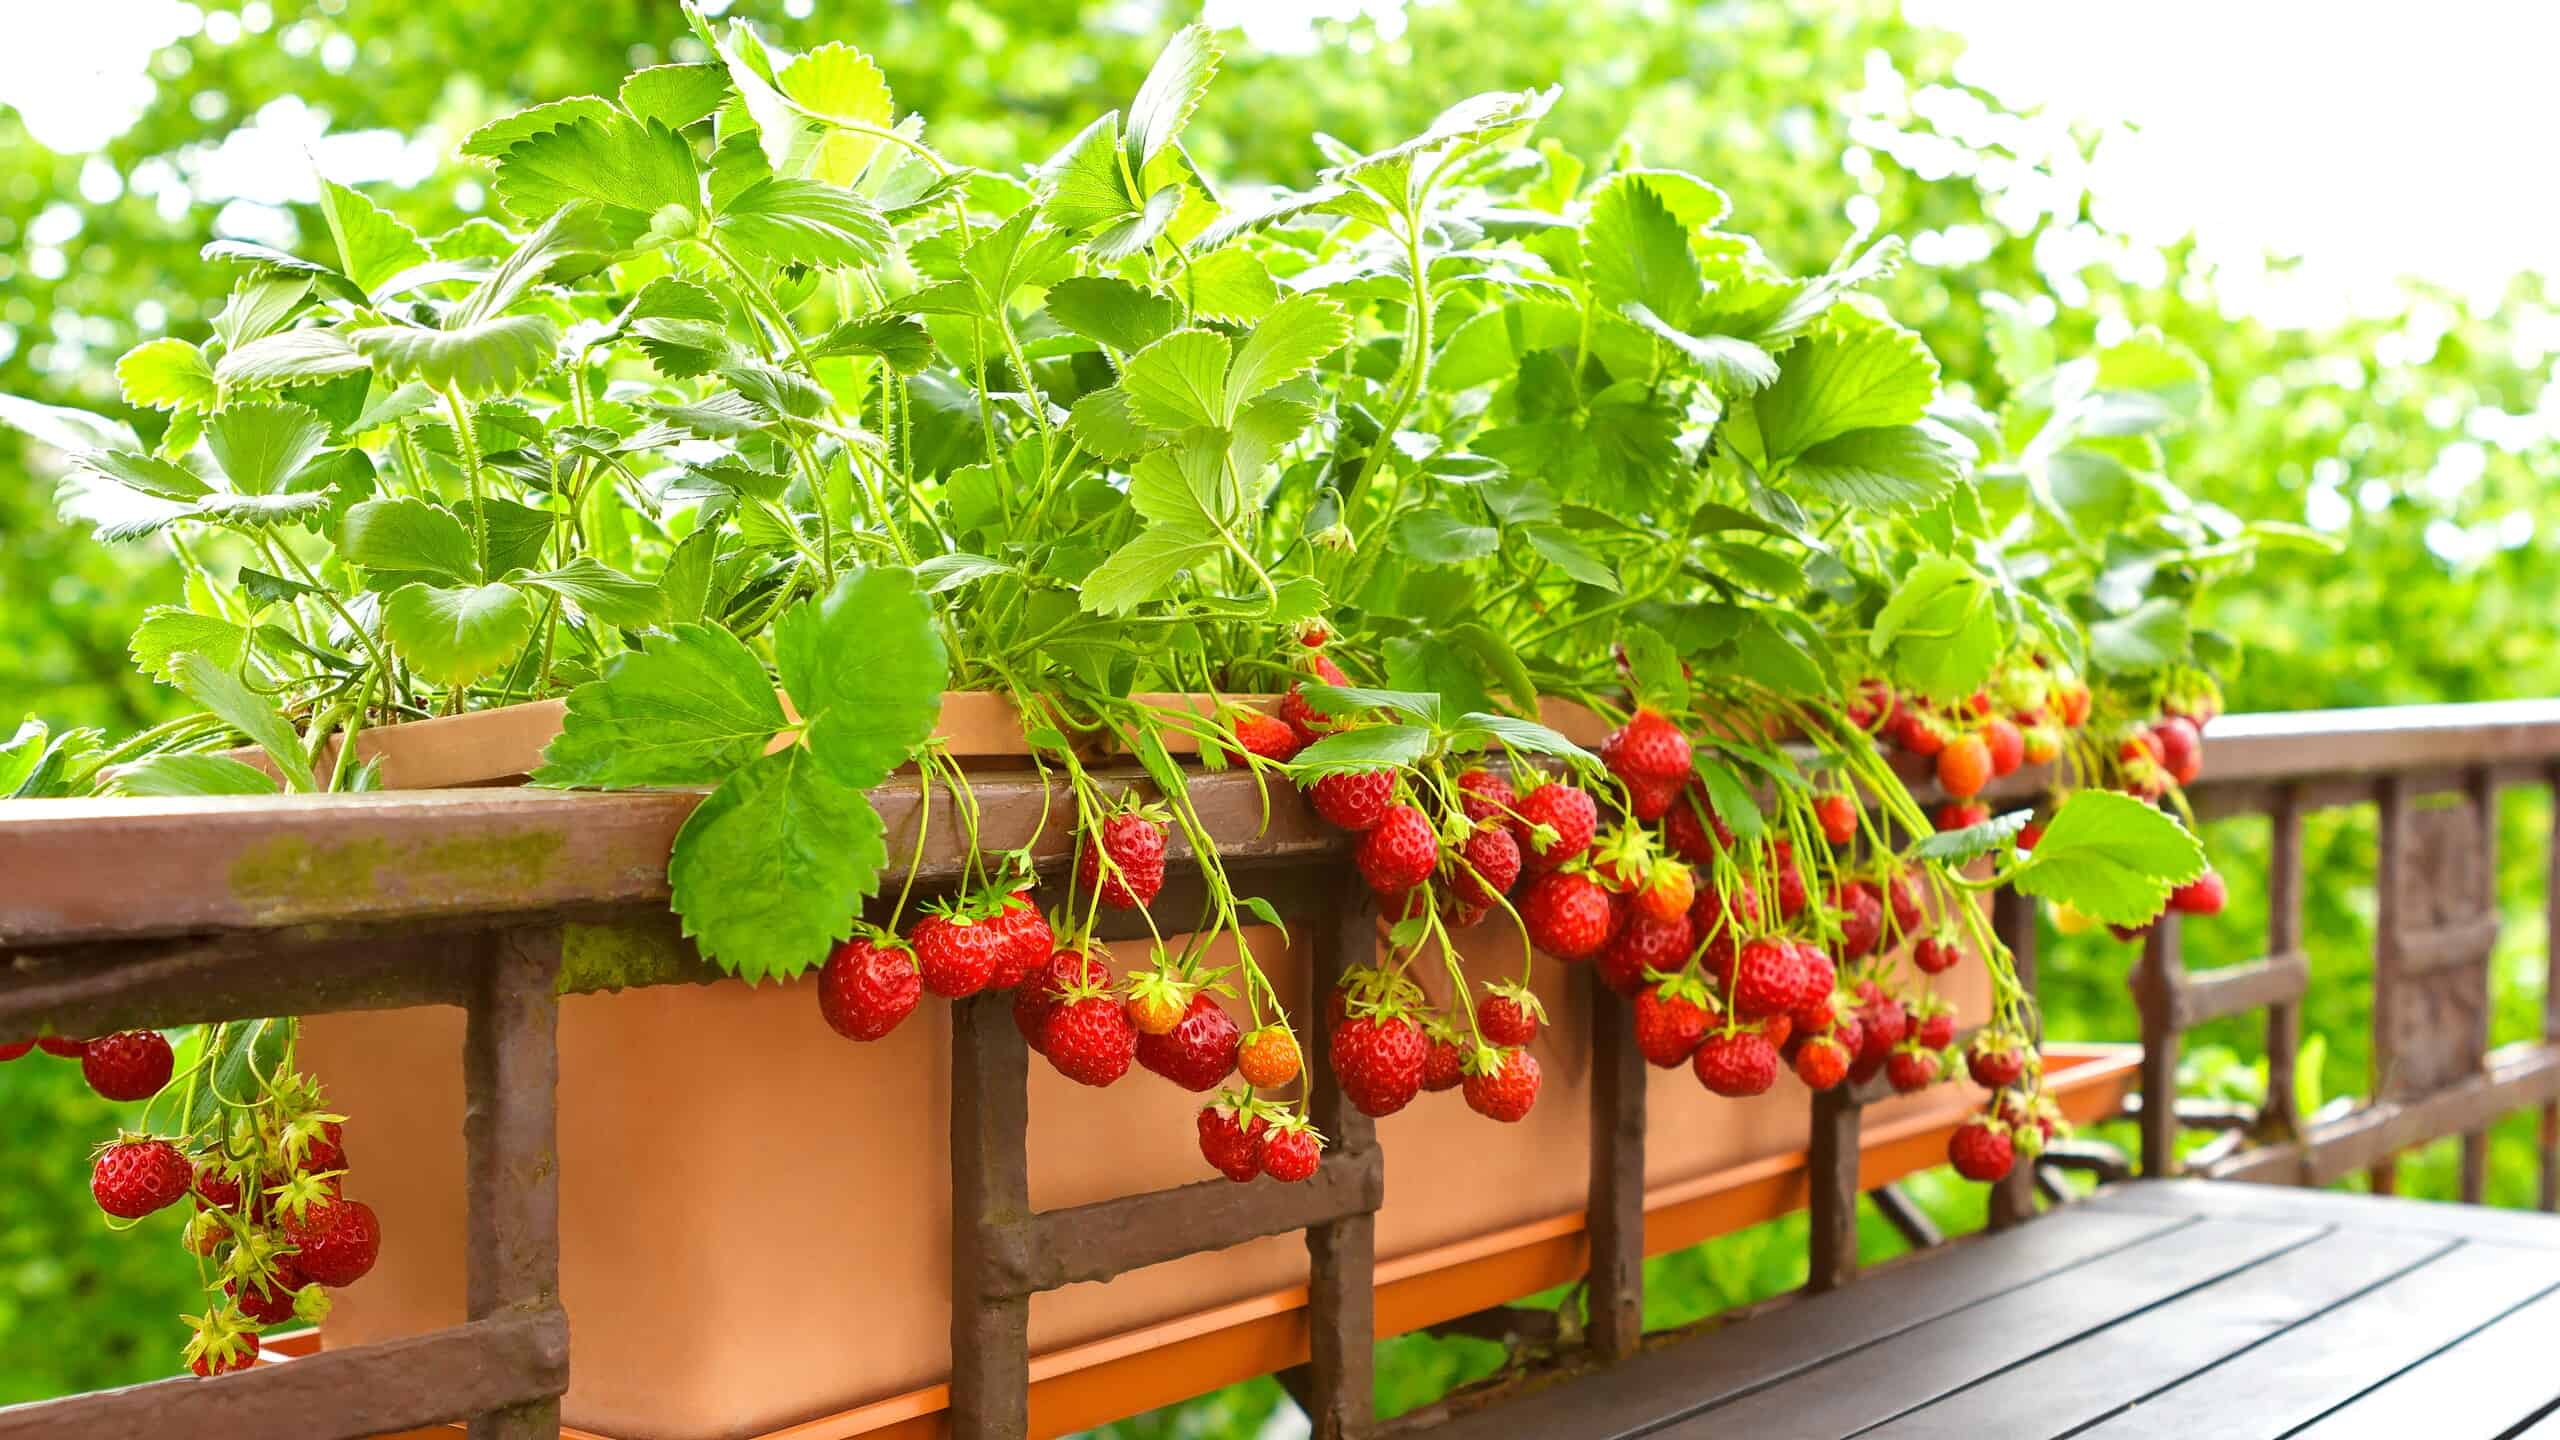 Strawberry plants with lots of ripe red strawberries in a balcony railing planter, apartment or urban gardening concept.